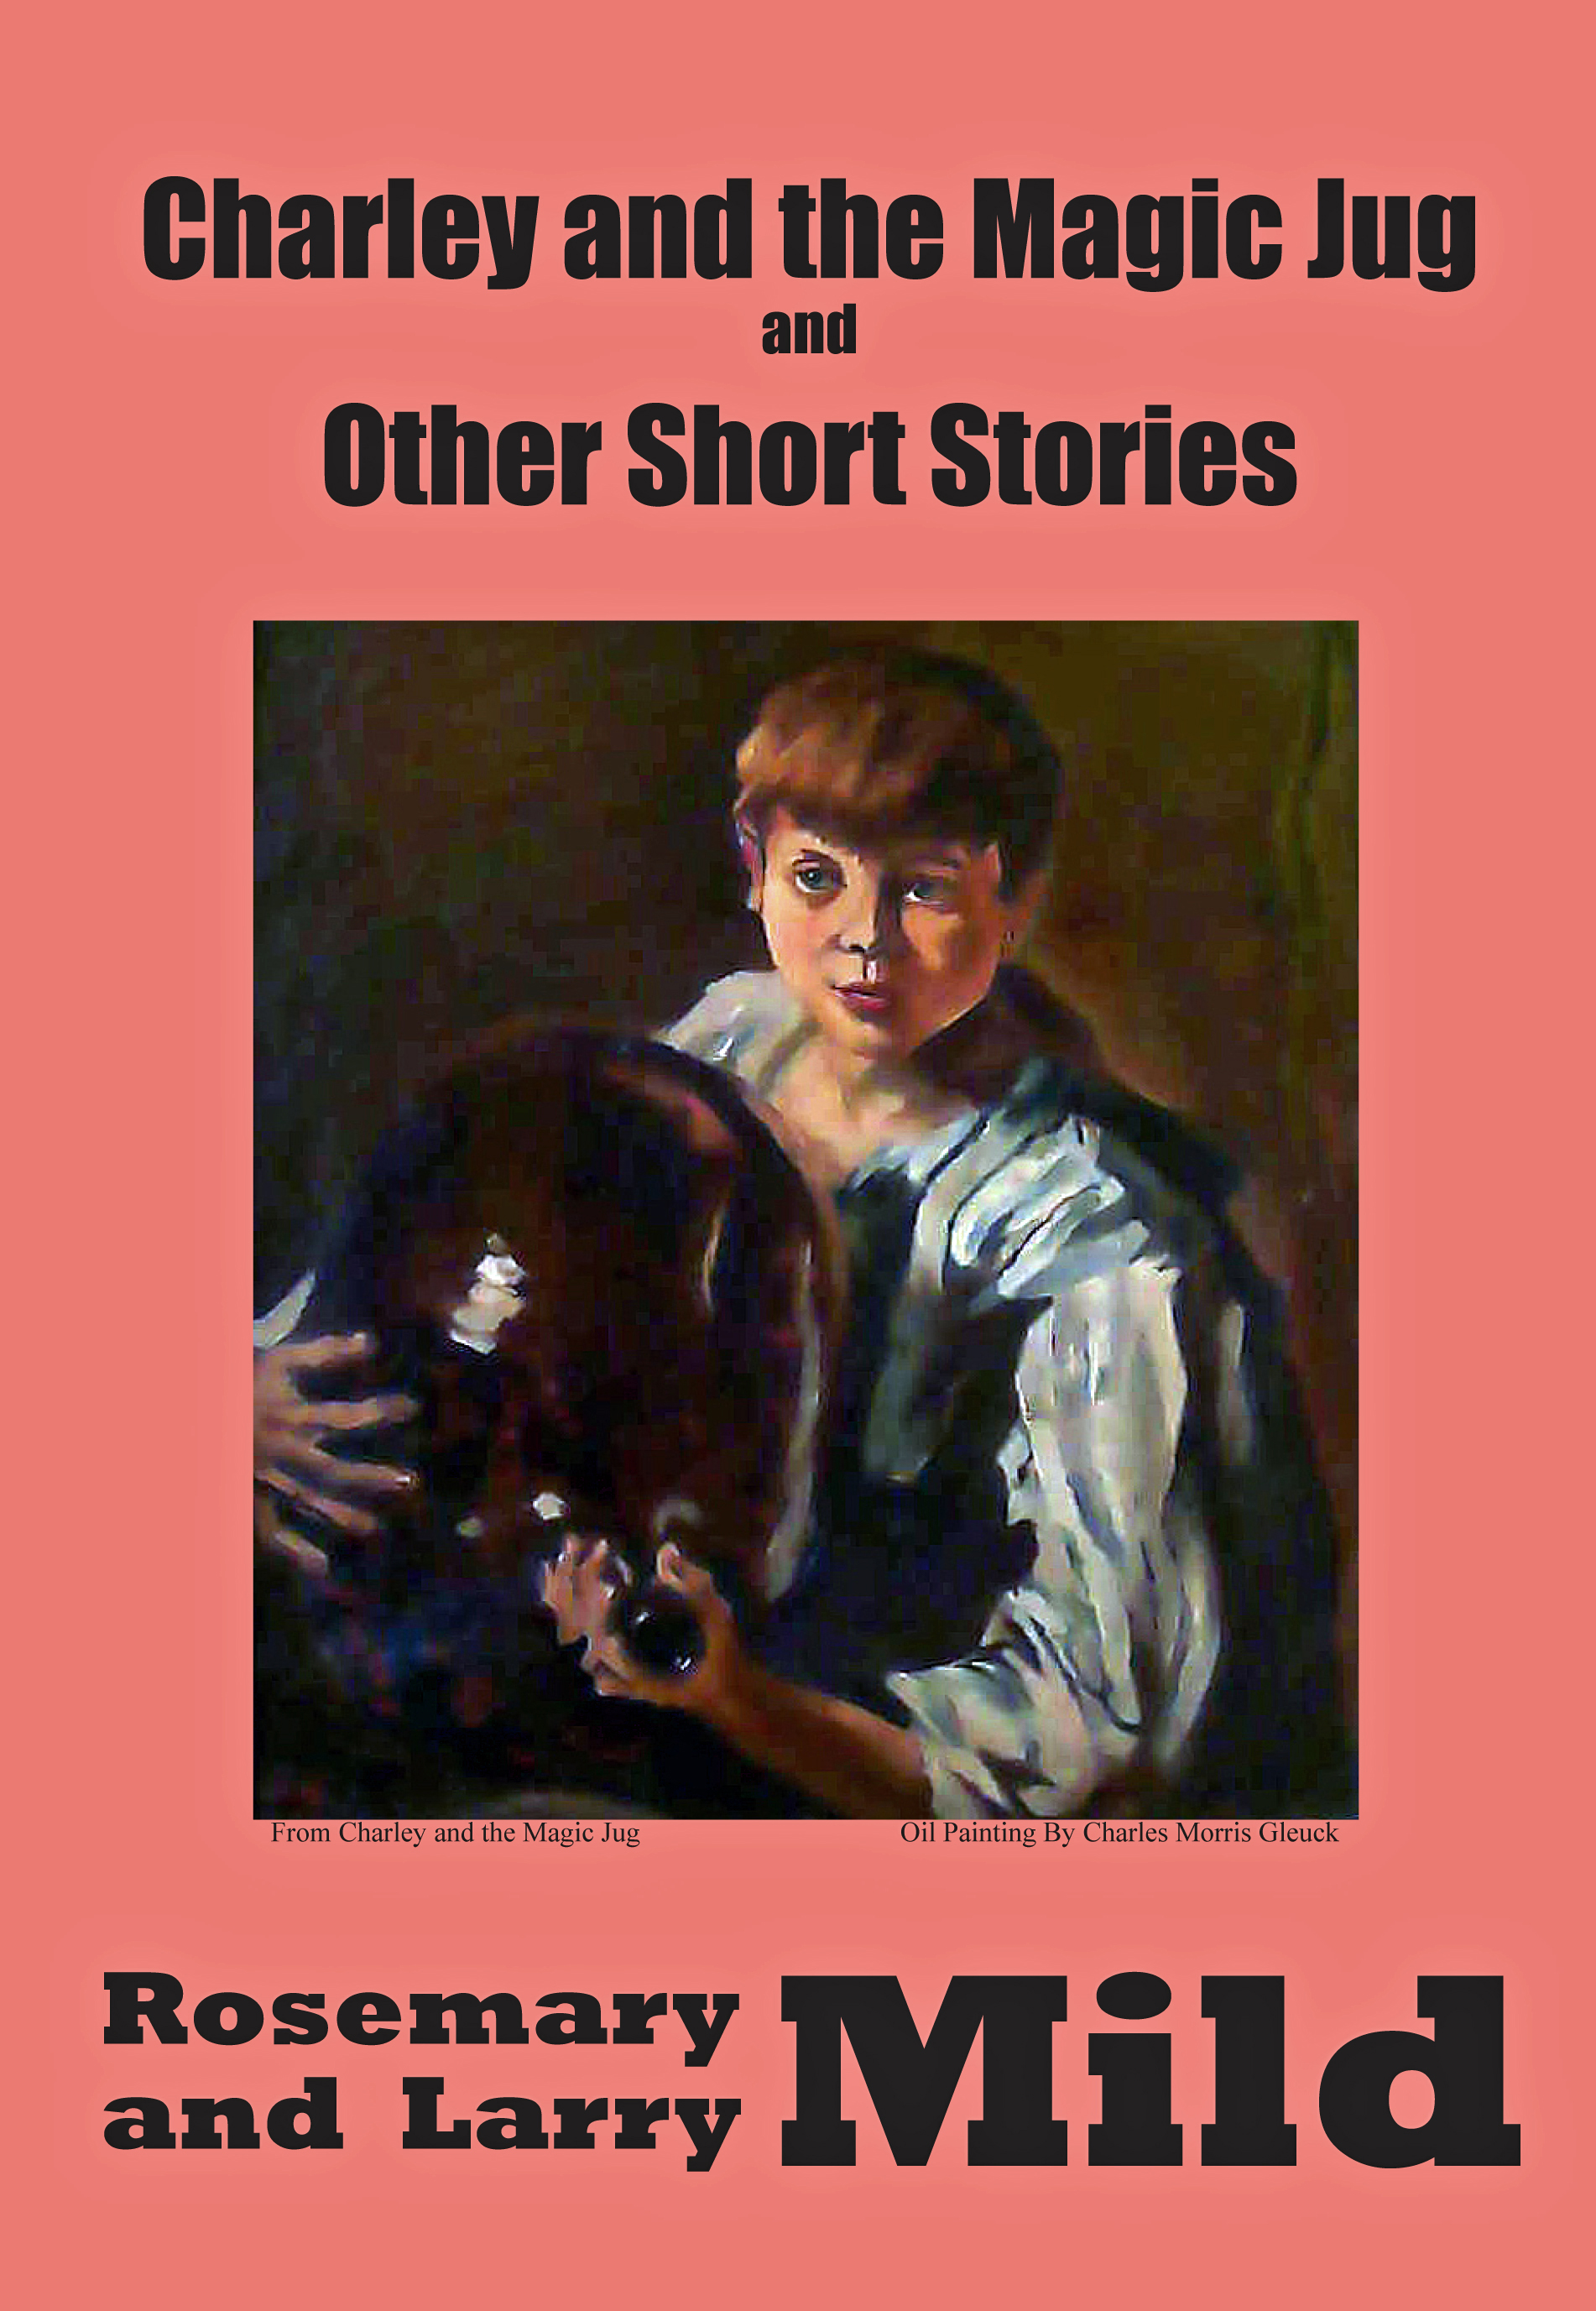 Charlie and the Magic Jug and Other Short Stories by Rosemary and Larry Mild